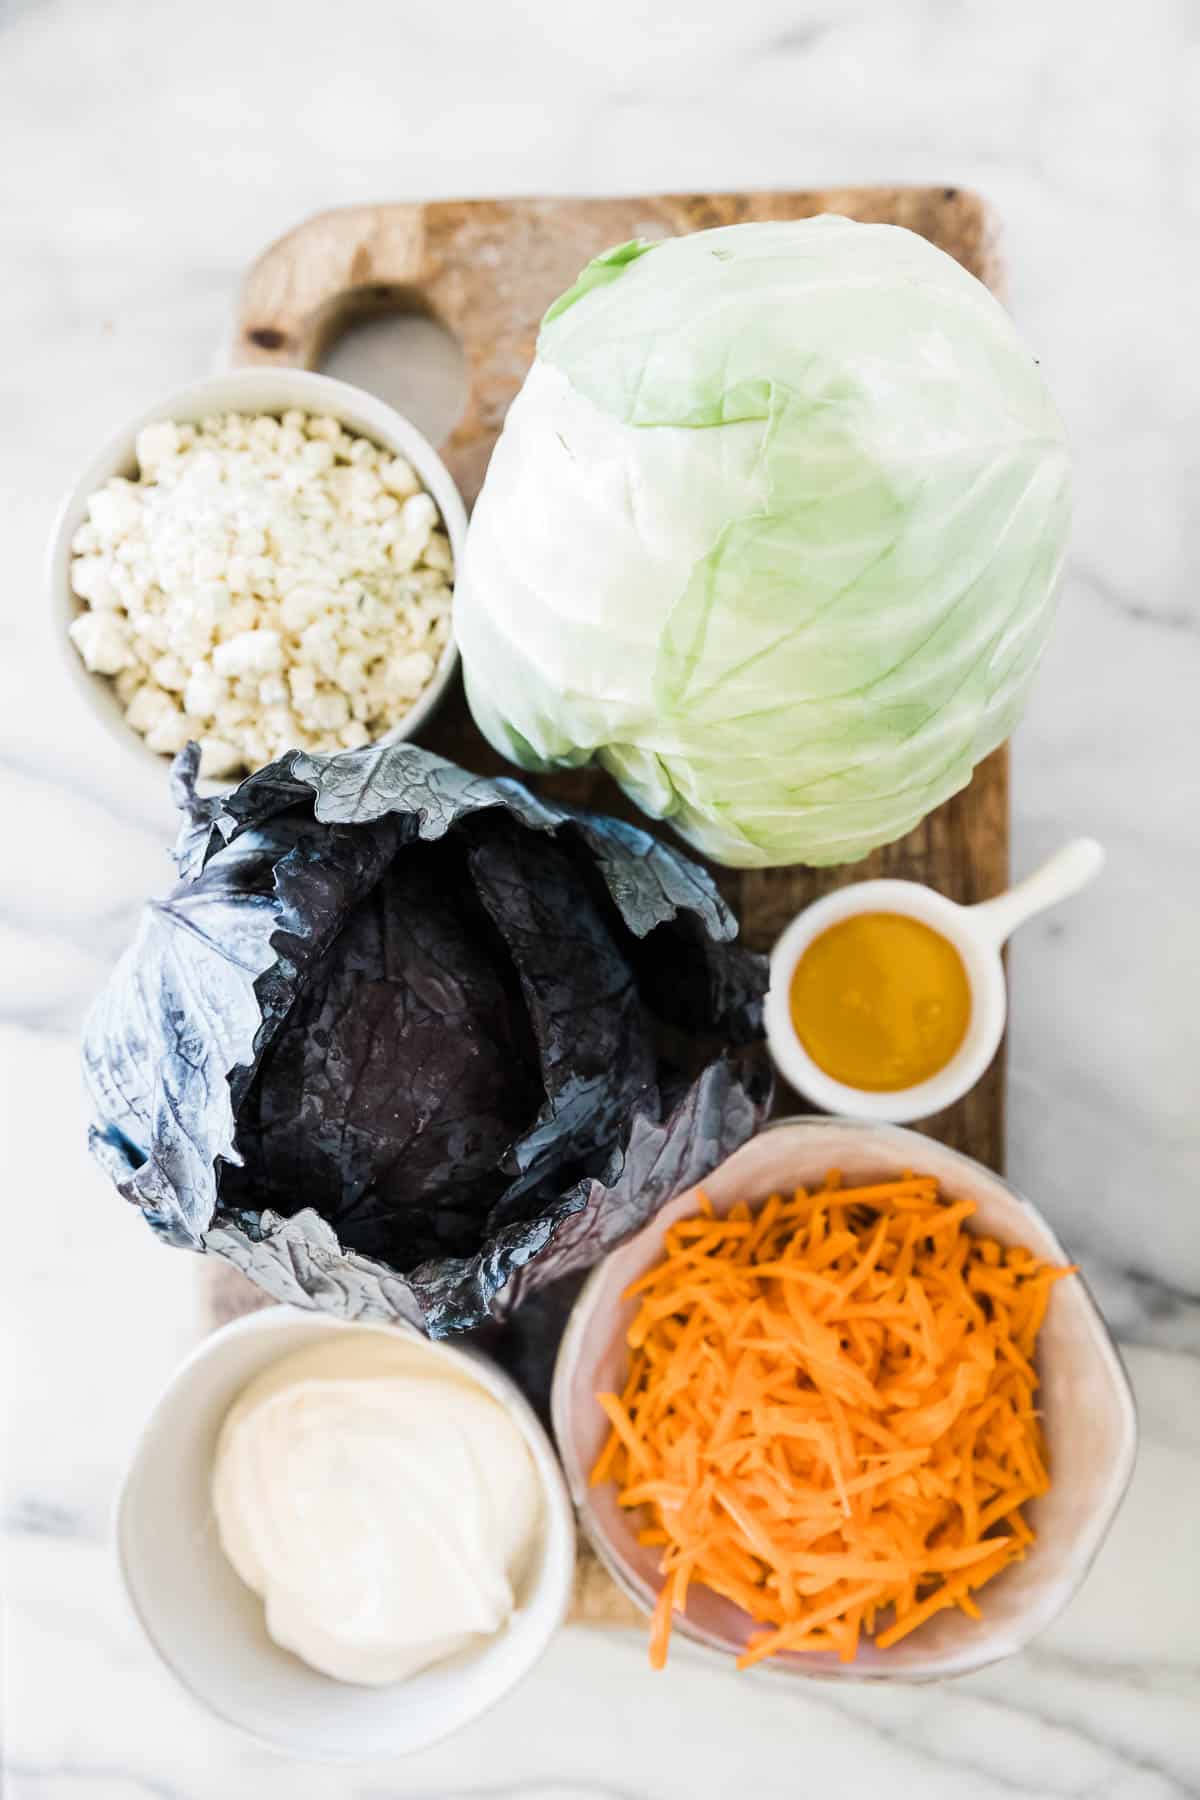 Ingredients needed to make coleslaw on a wooden cutting board - cabbage, carrots, and dressing.